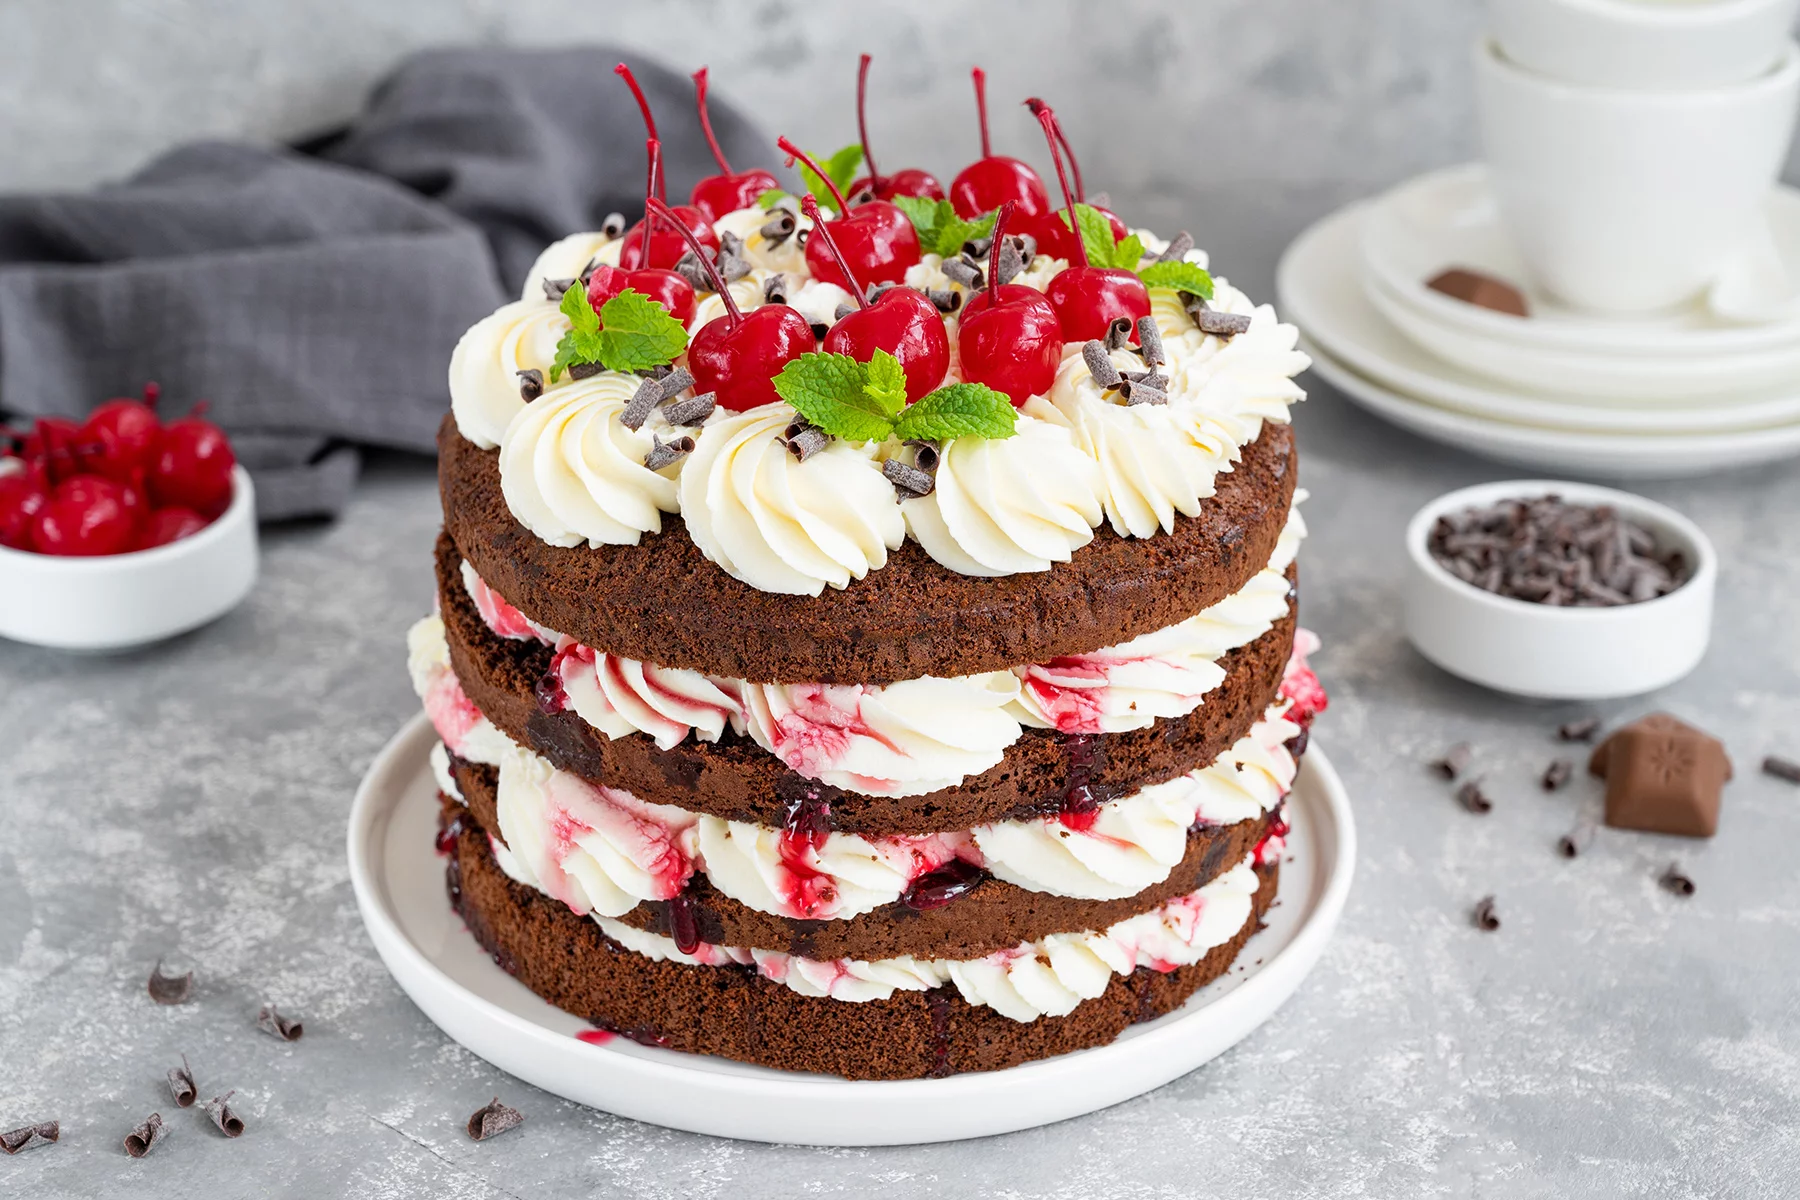 A black forest cake